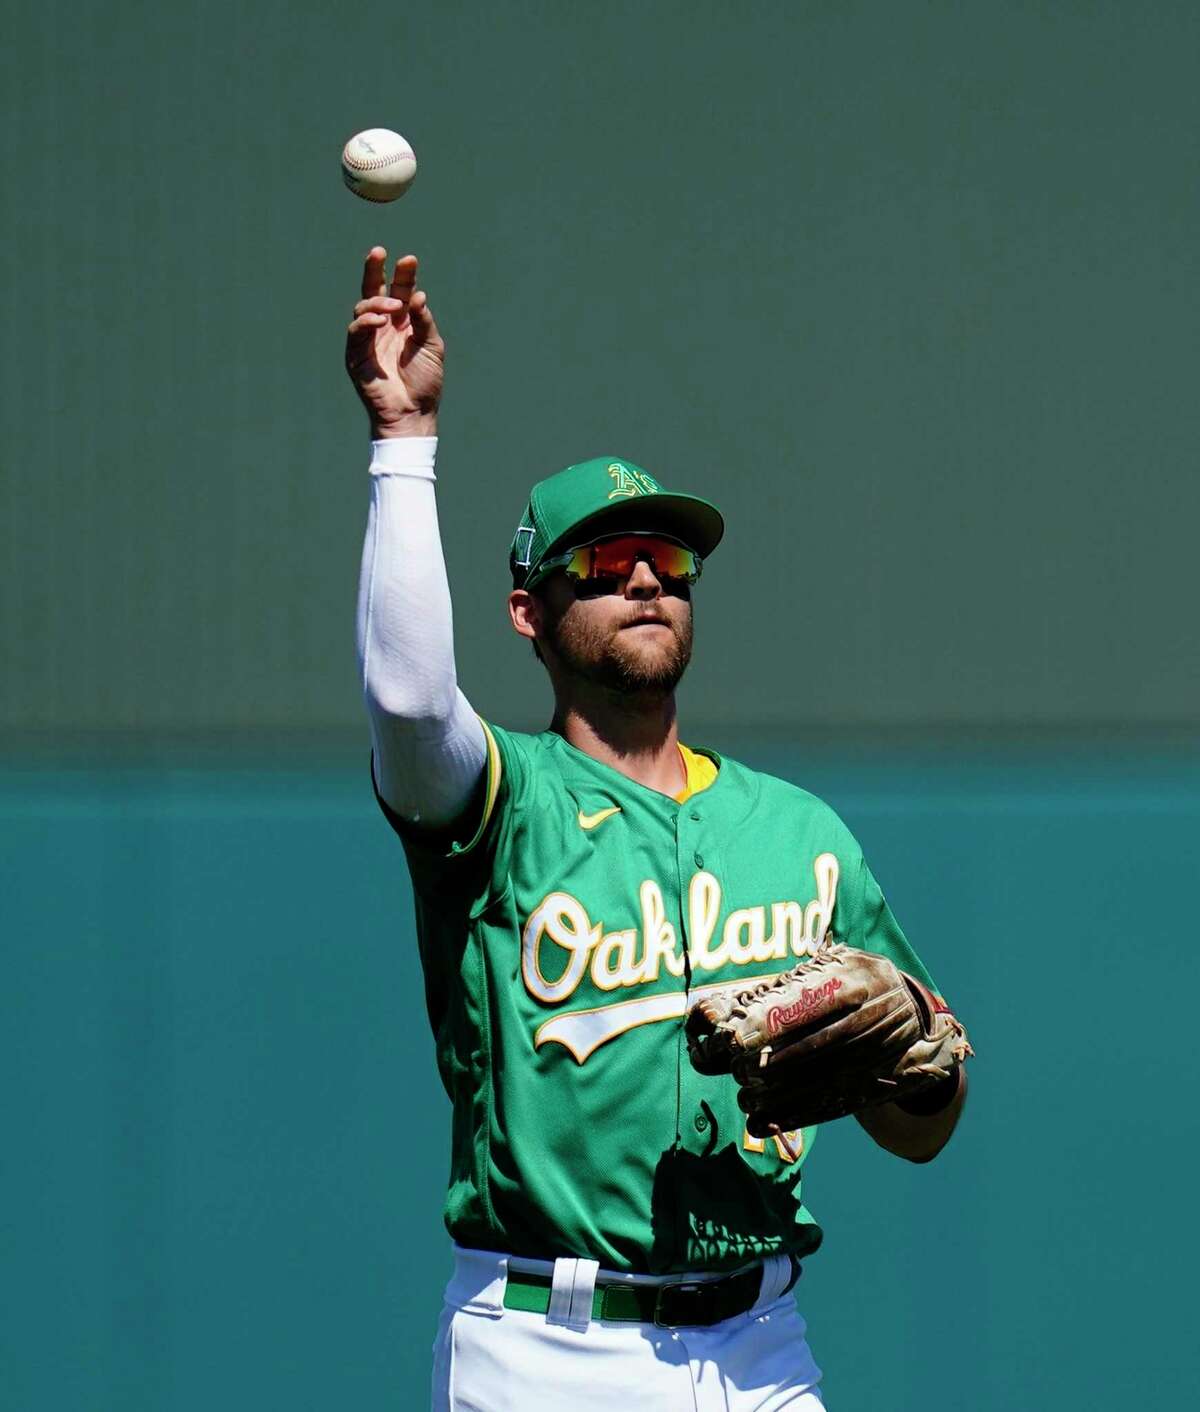 Oakland Athletics left fielder Chad Pinder tosses the ball back to the infield during the third inning of a spring training baseball game against the Colorado Rockies Saturday, April 2, 2022, in Mesa, Ariz. (AP Photo/Ross D. Franklin)